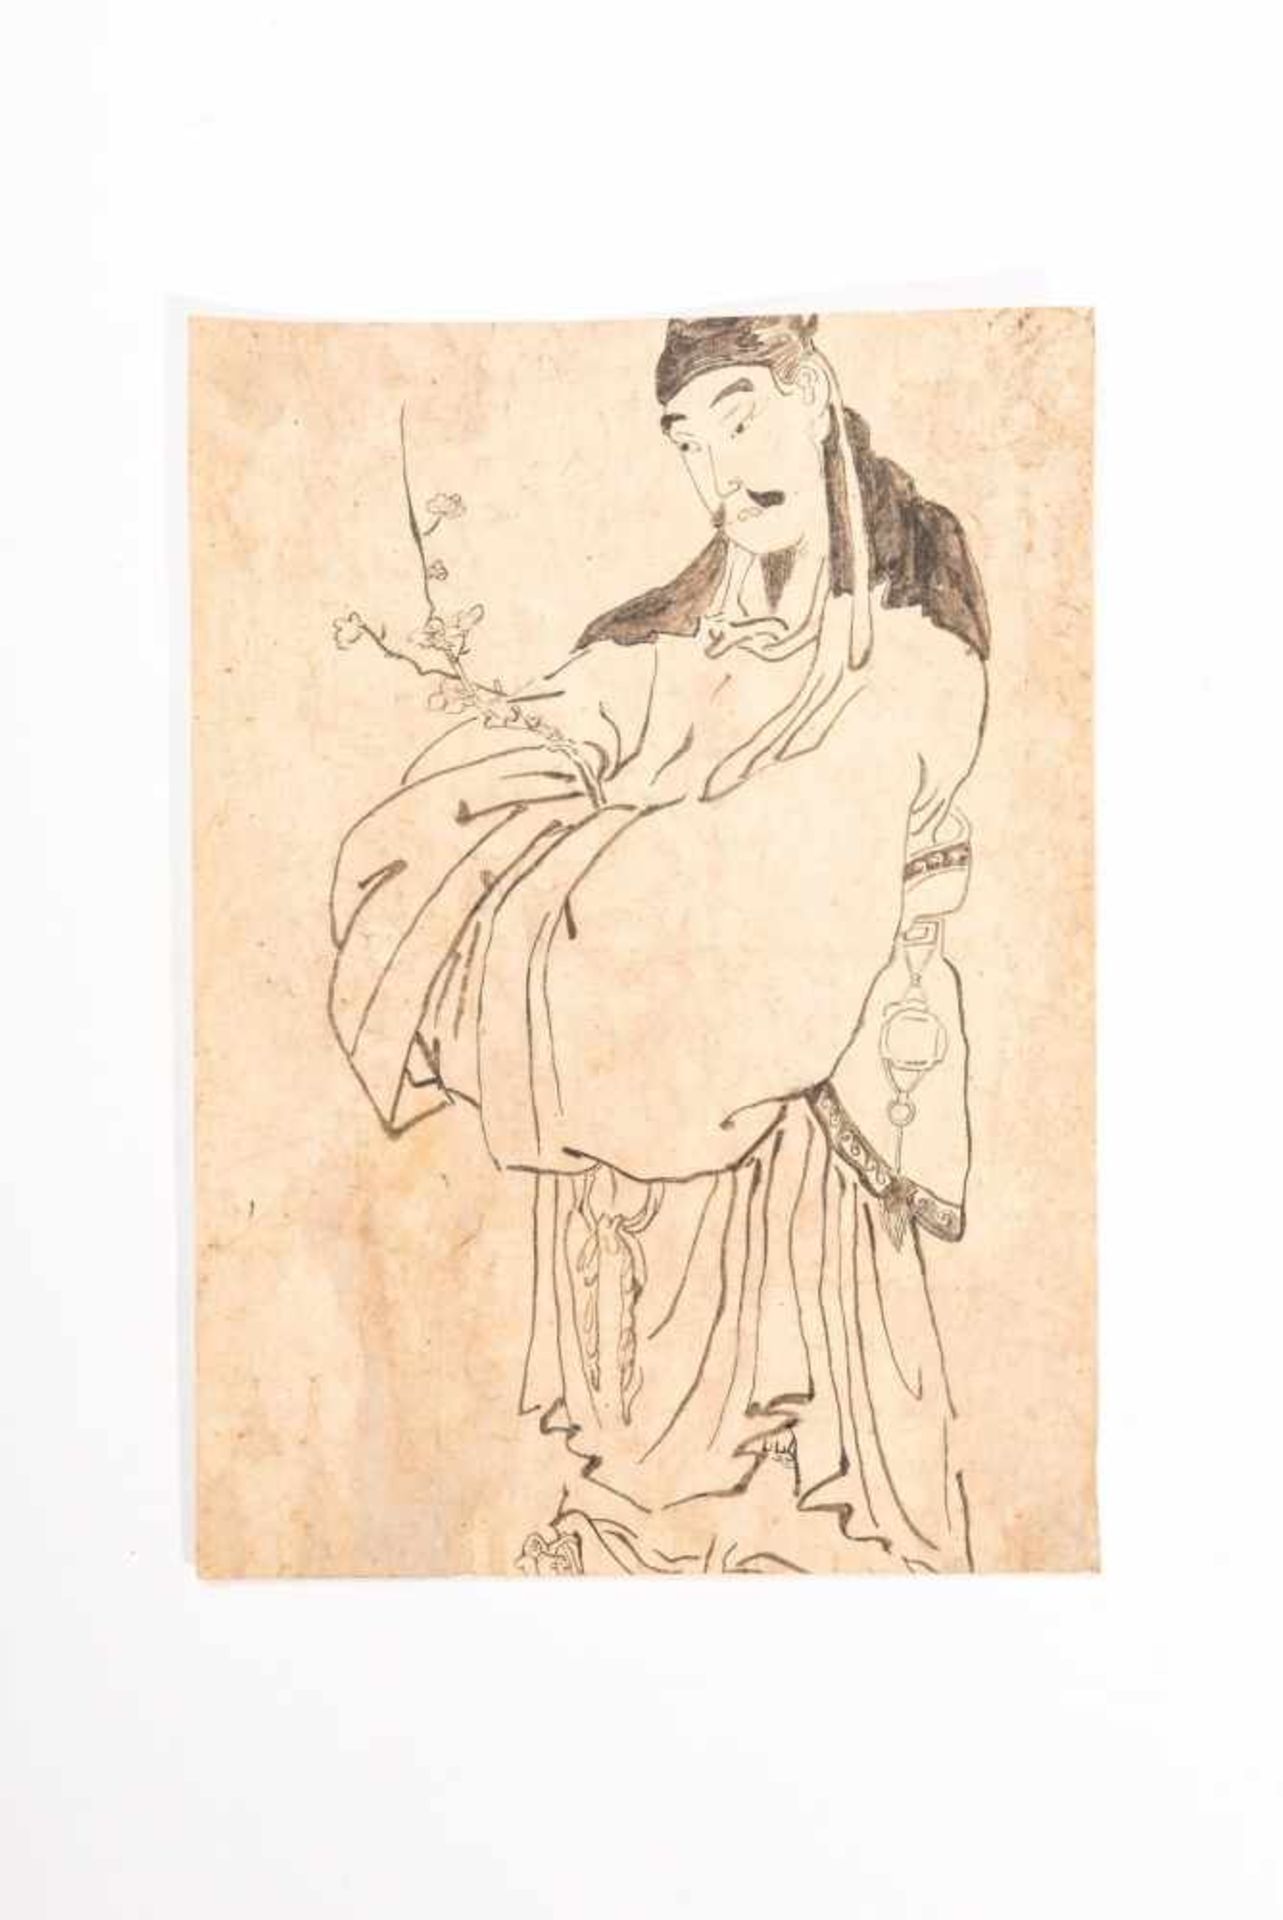 AN INK DRAWING DEPICTING ‘GUAN-YU’ Ink on paper. China, Qing Dynasty An ink drawing or sketch on